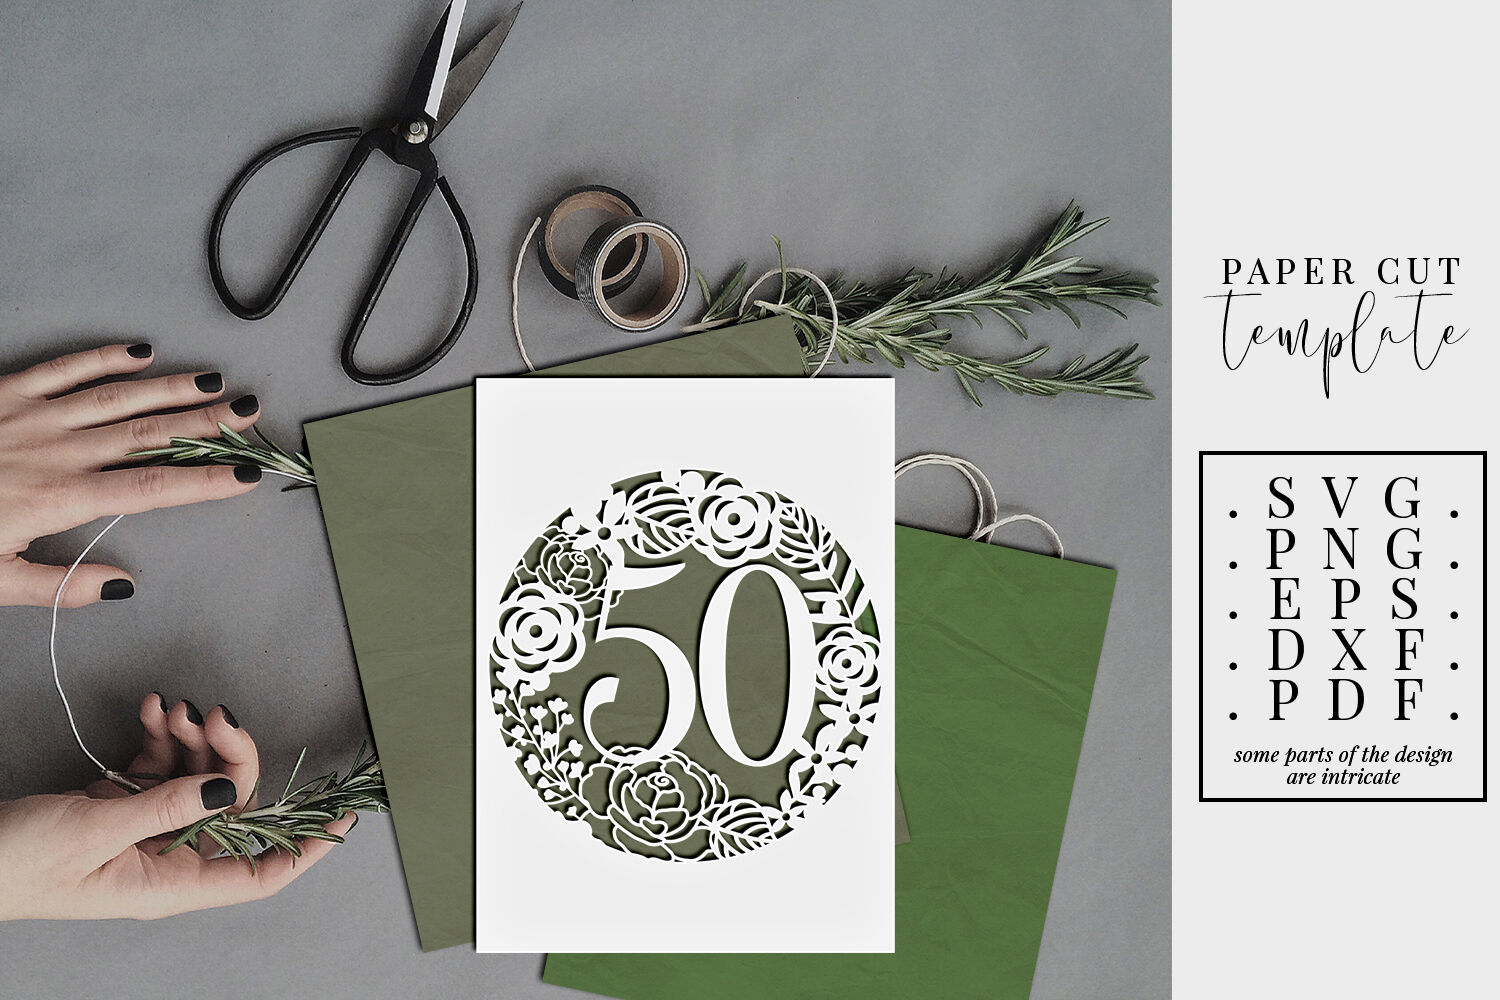 Download 50 Birthday Frame Papercut Template 50th Birthday Svg Pdf By Personal Epiphany Thehungryjpeg Com SVG, PNG, EPS, DXF File